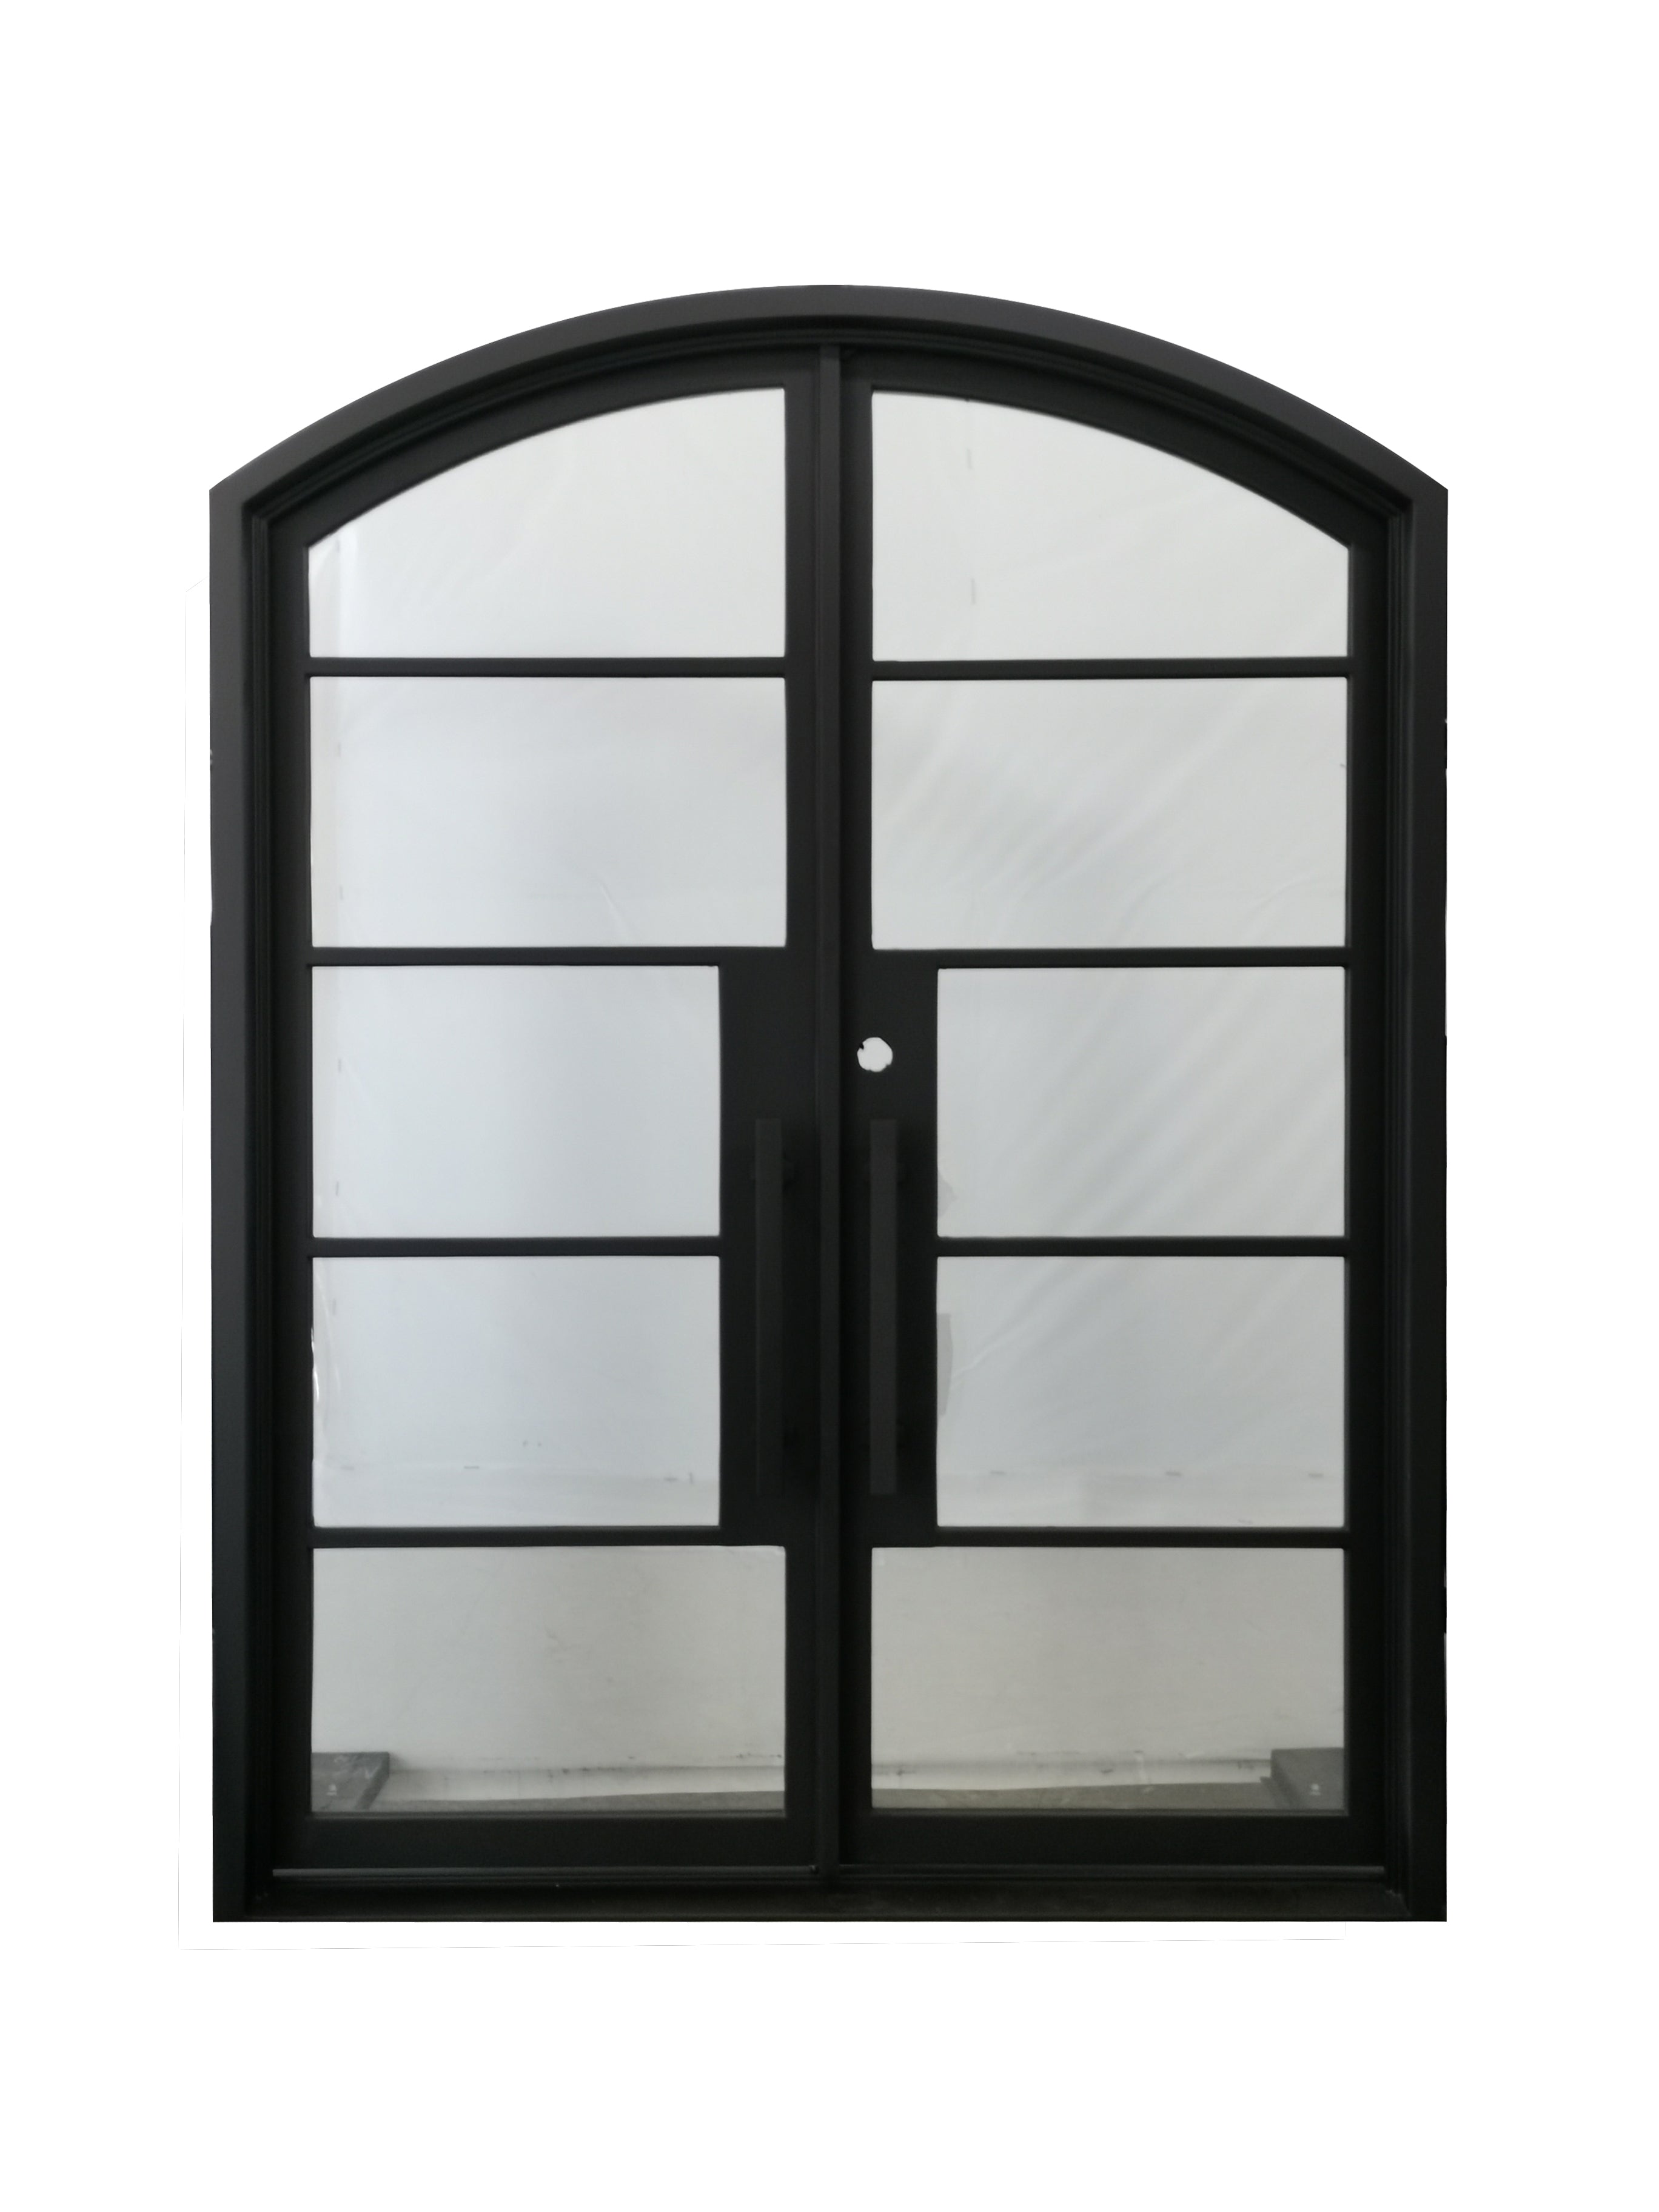 Travis Model Double Front Entry Iron Door With Tempered Low E Clear Glass Matt Black Finish - AAWAIZ IMPORTS